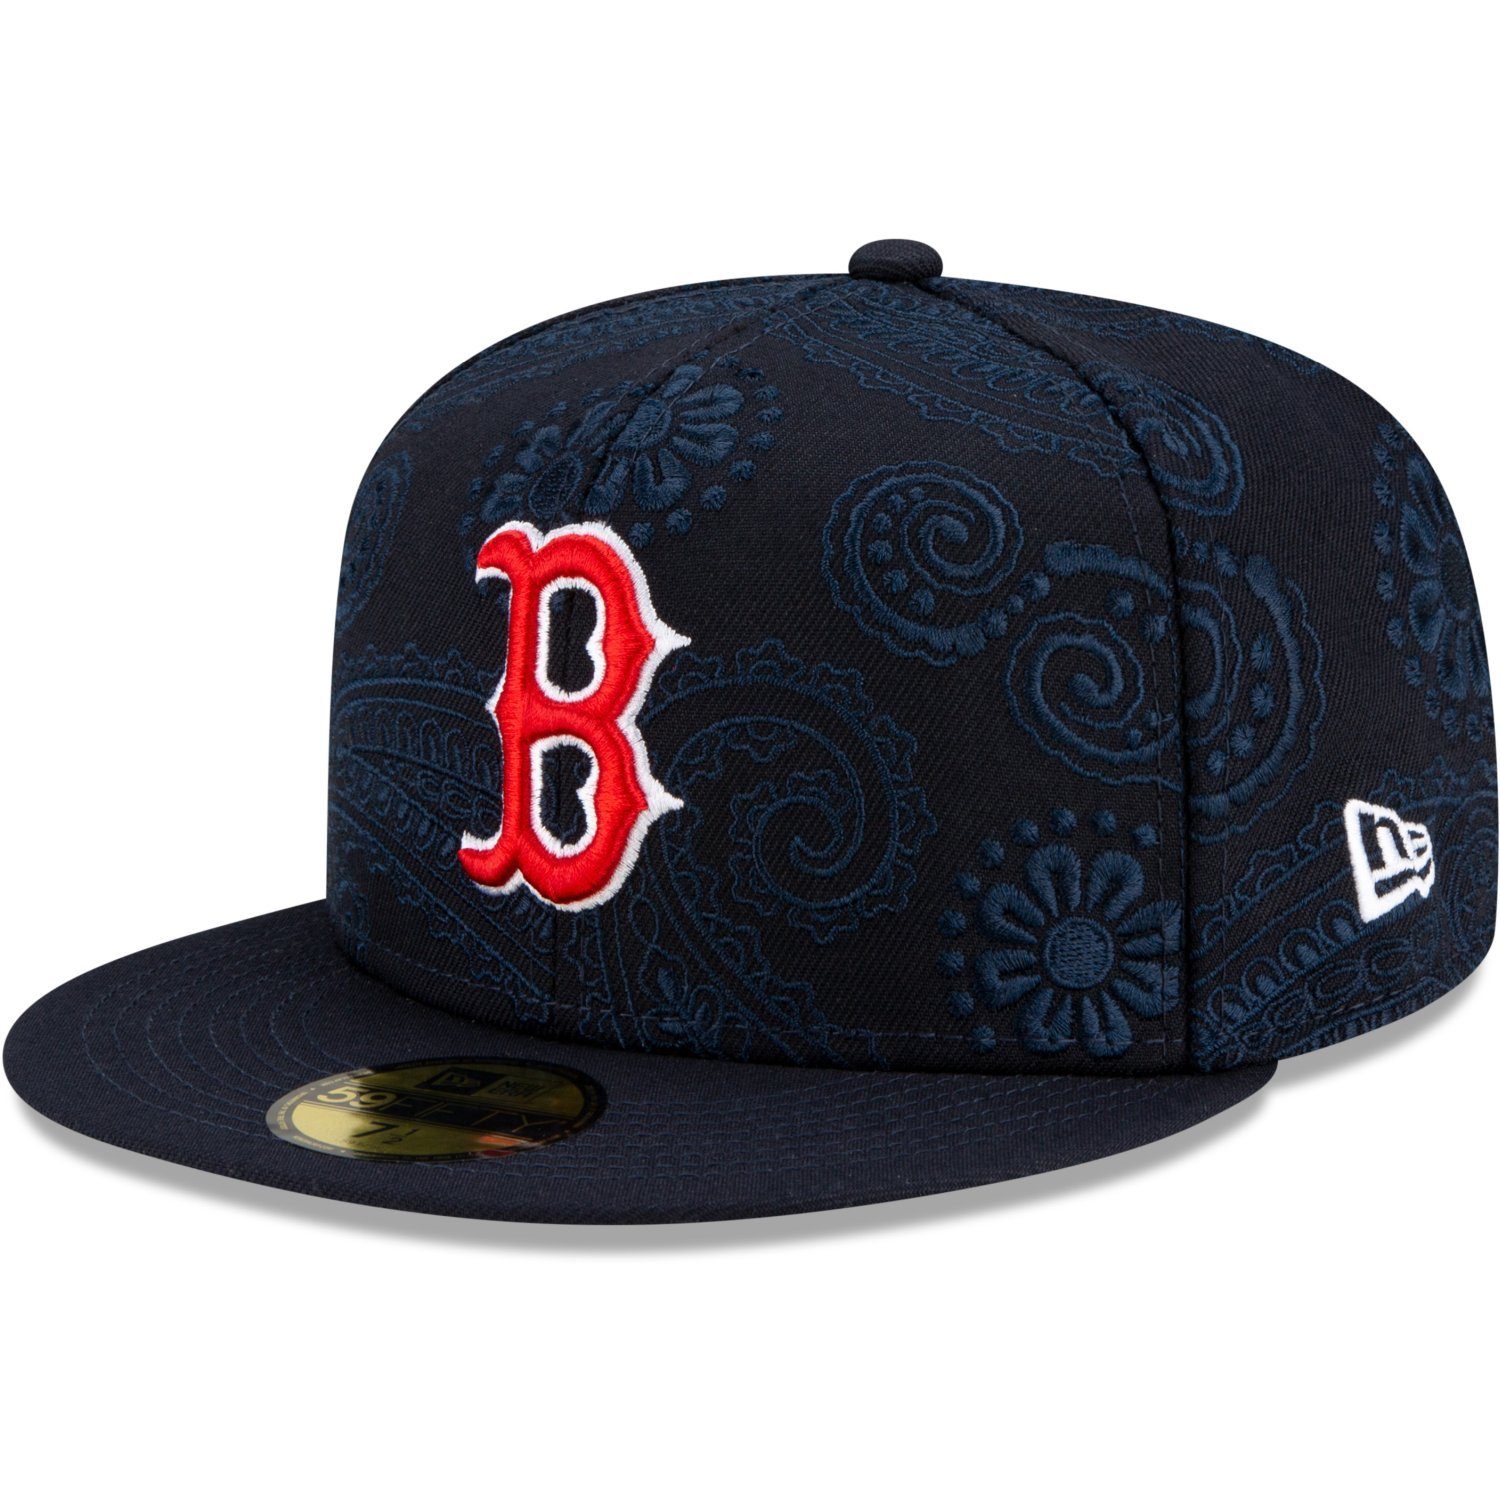 New Era Fitted Cap 59Fifty SWIRL PAISLEY Boston Red Sox